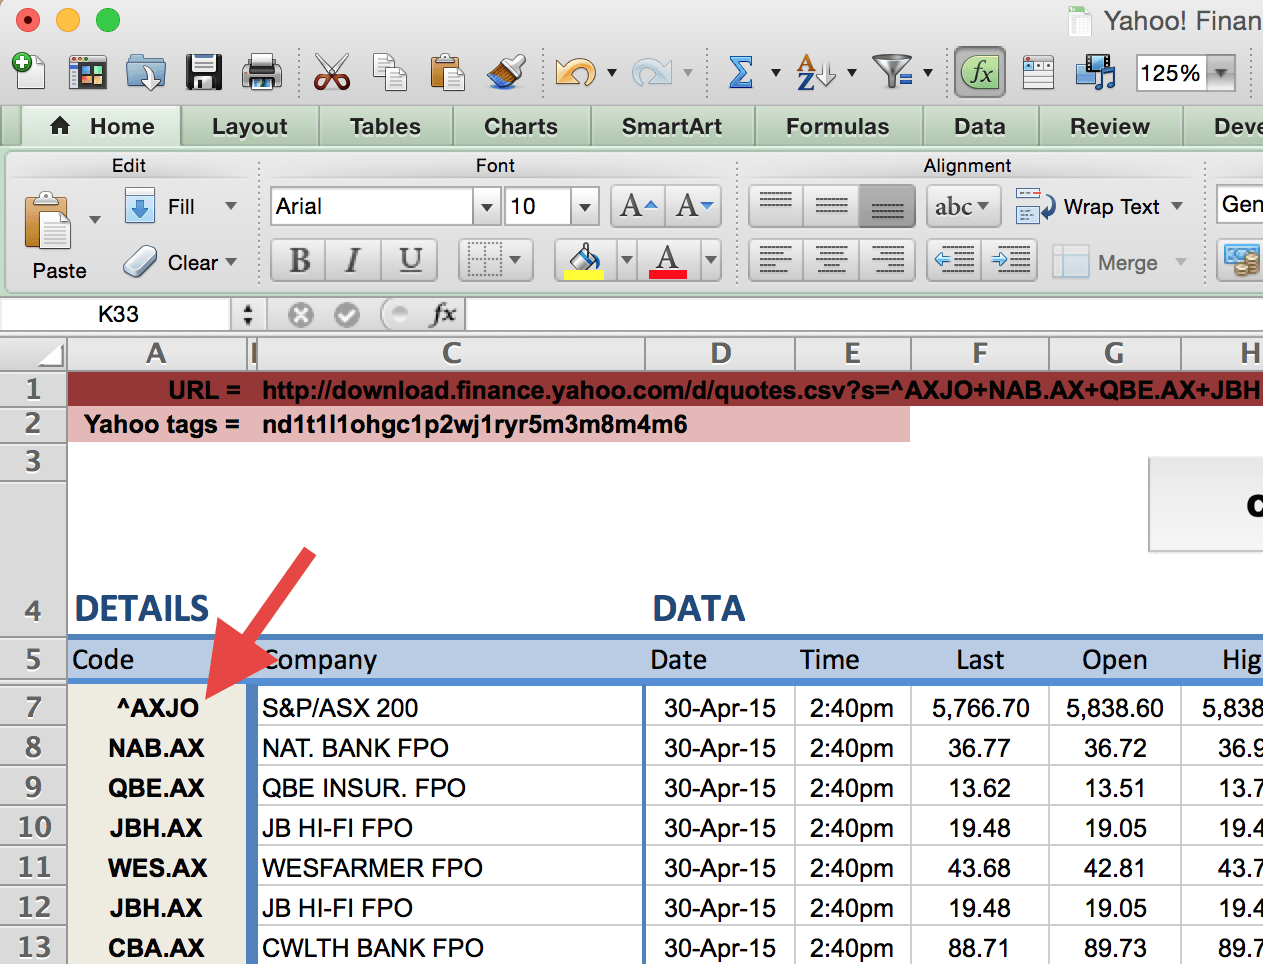 how to download yahoo finance data into excel on mac